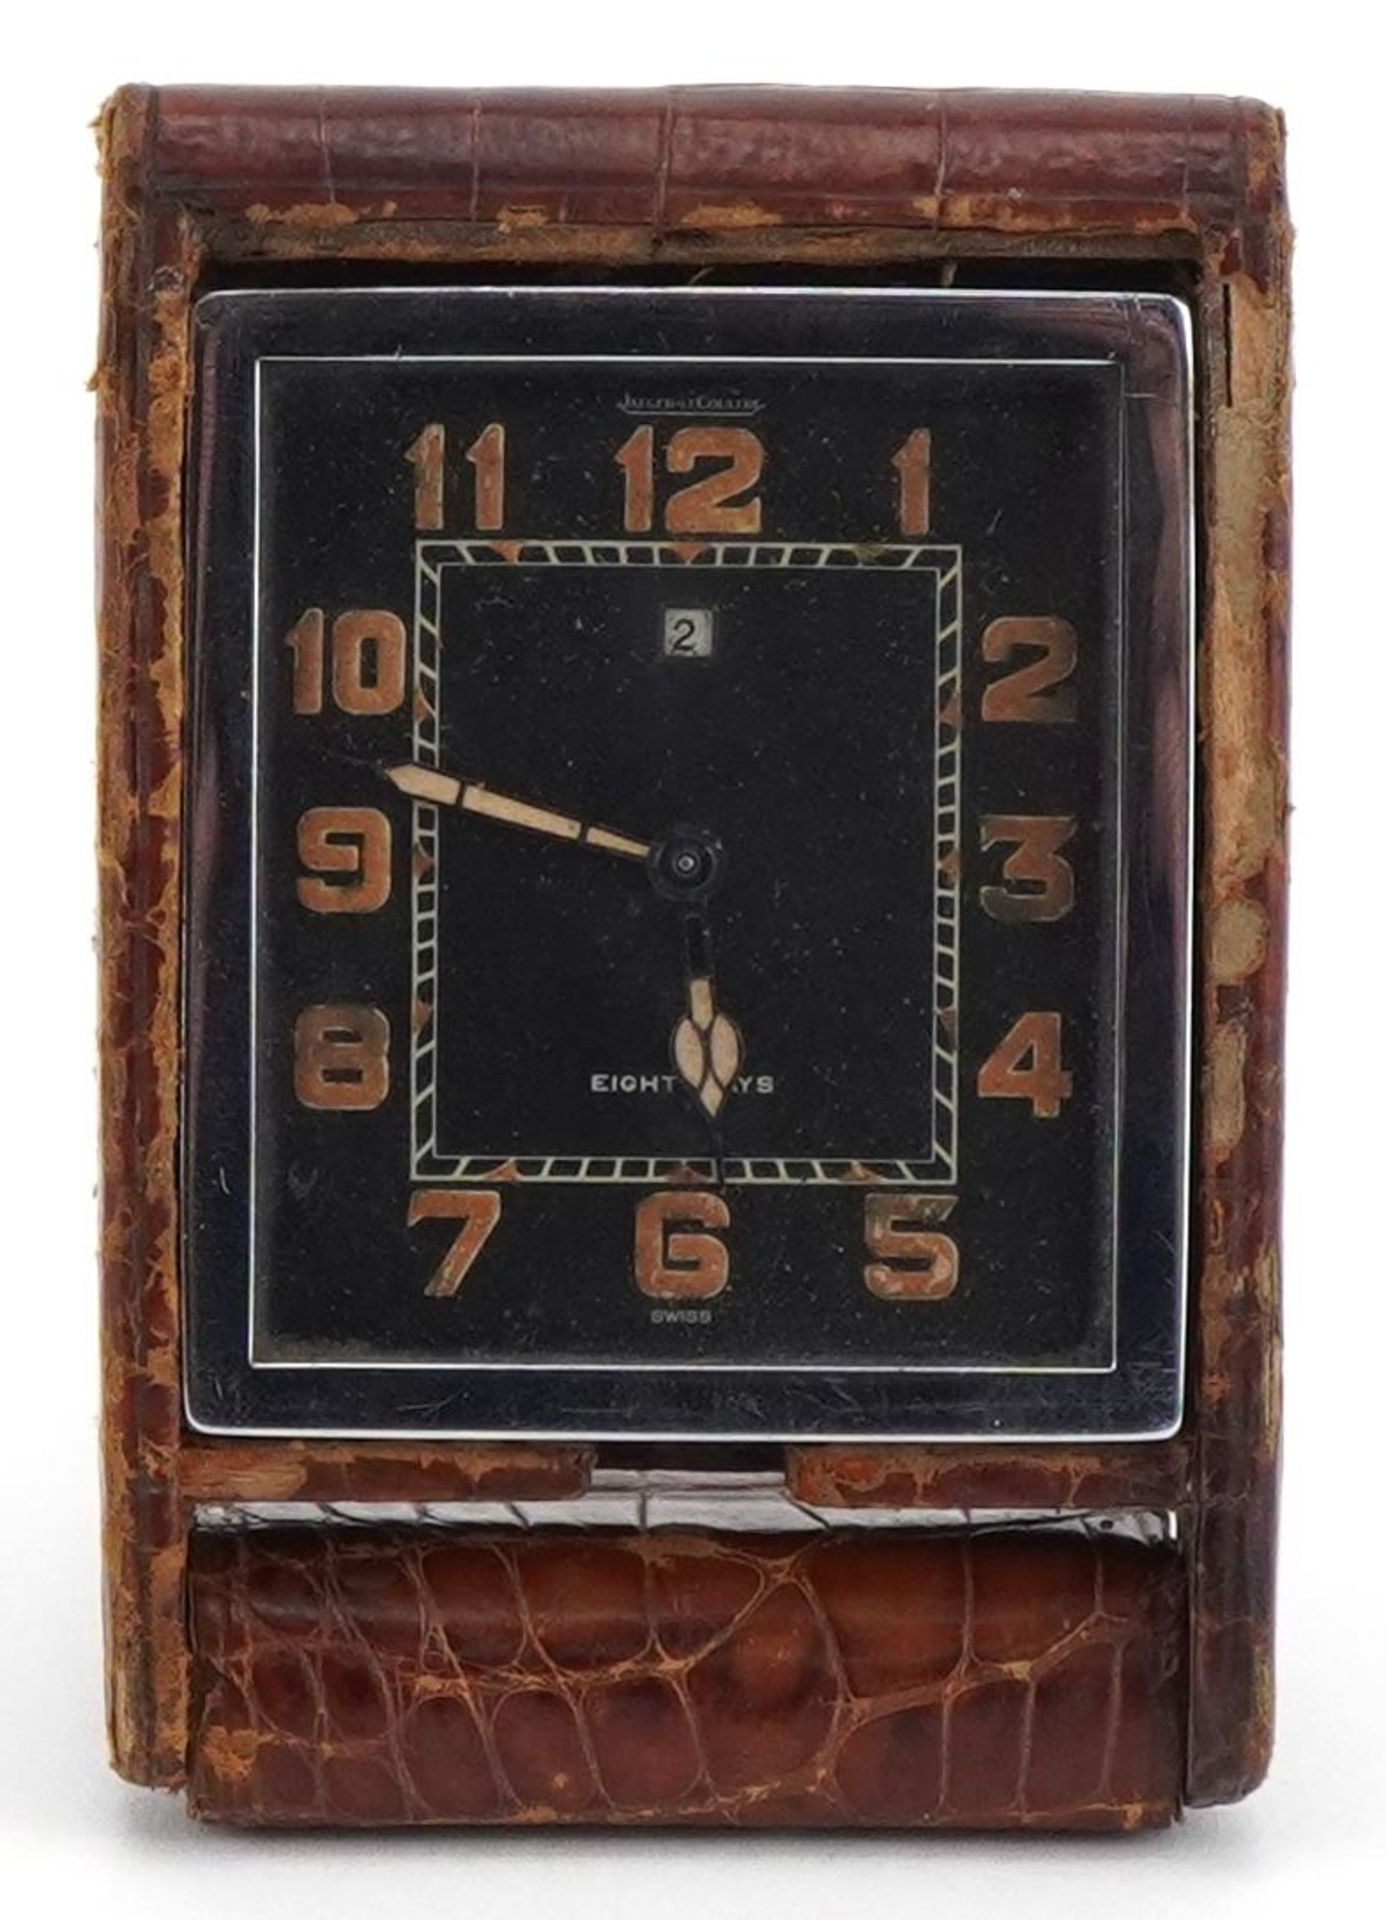 Art Deco Jaeger LeCoultre eight day travel clock with simulated crocodile skin leather case, - Image 2 of 4